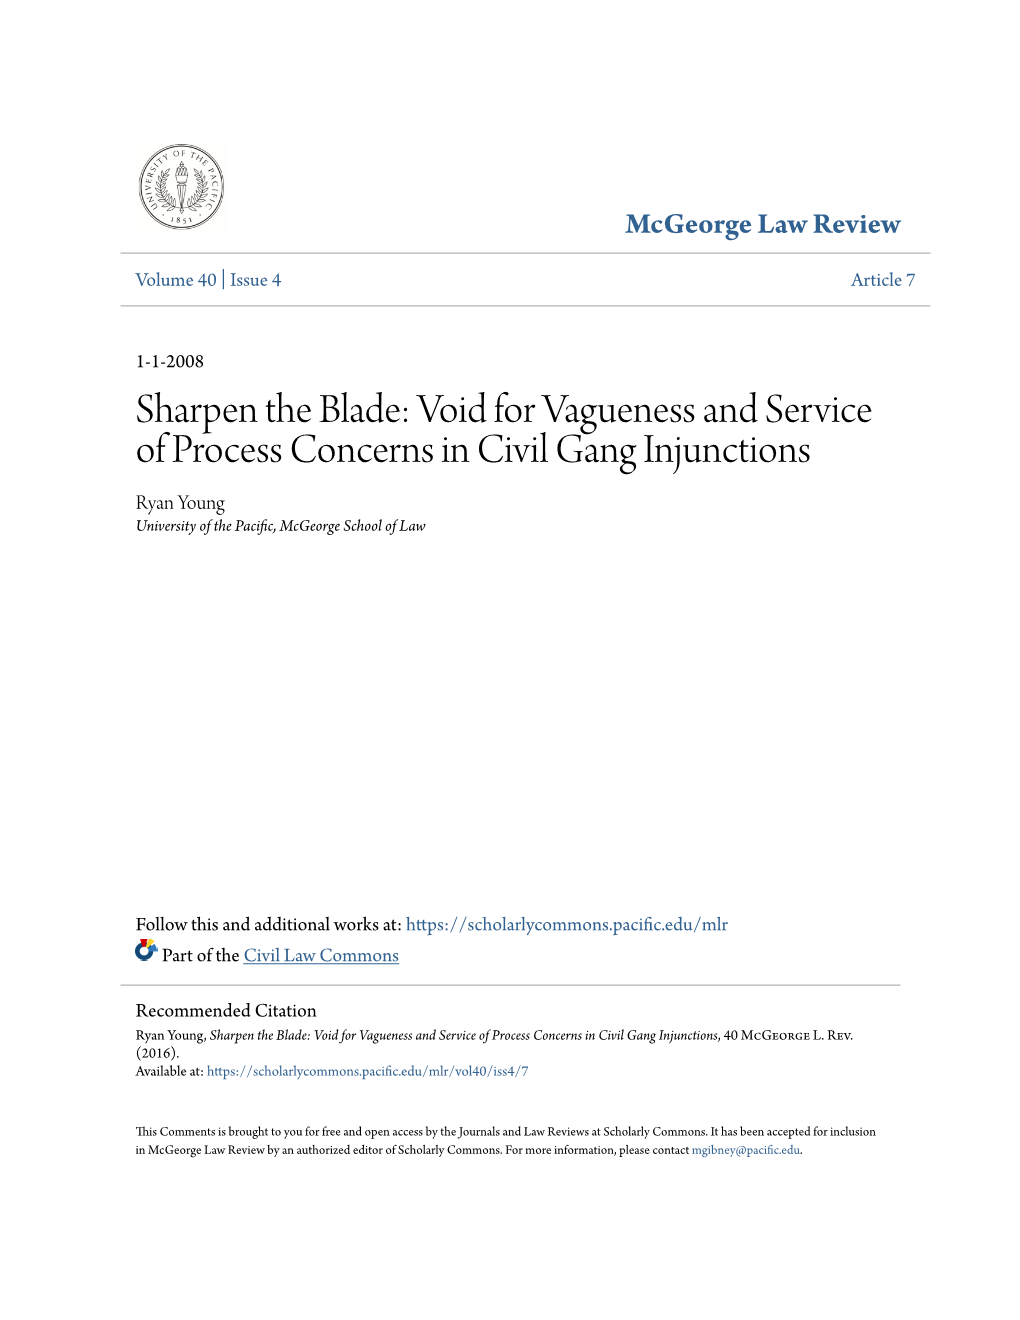 Void for Vagueness and Service of Process Concerns in Civil Gang Injunctions Ryan Young University of the Pacific, Mcgeorge School of Law